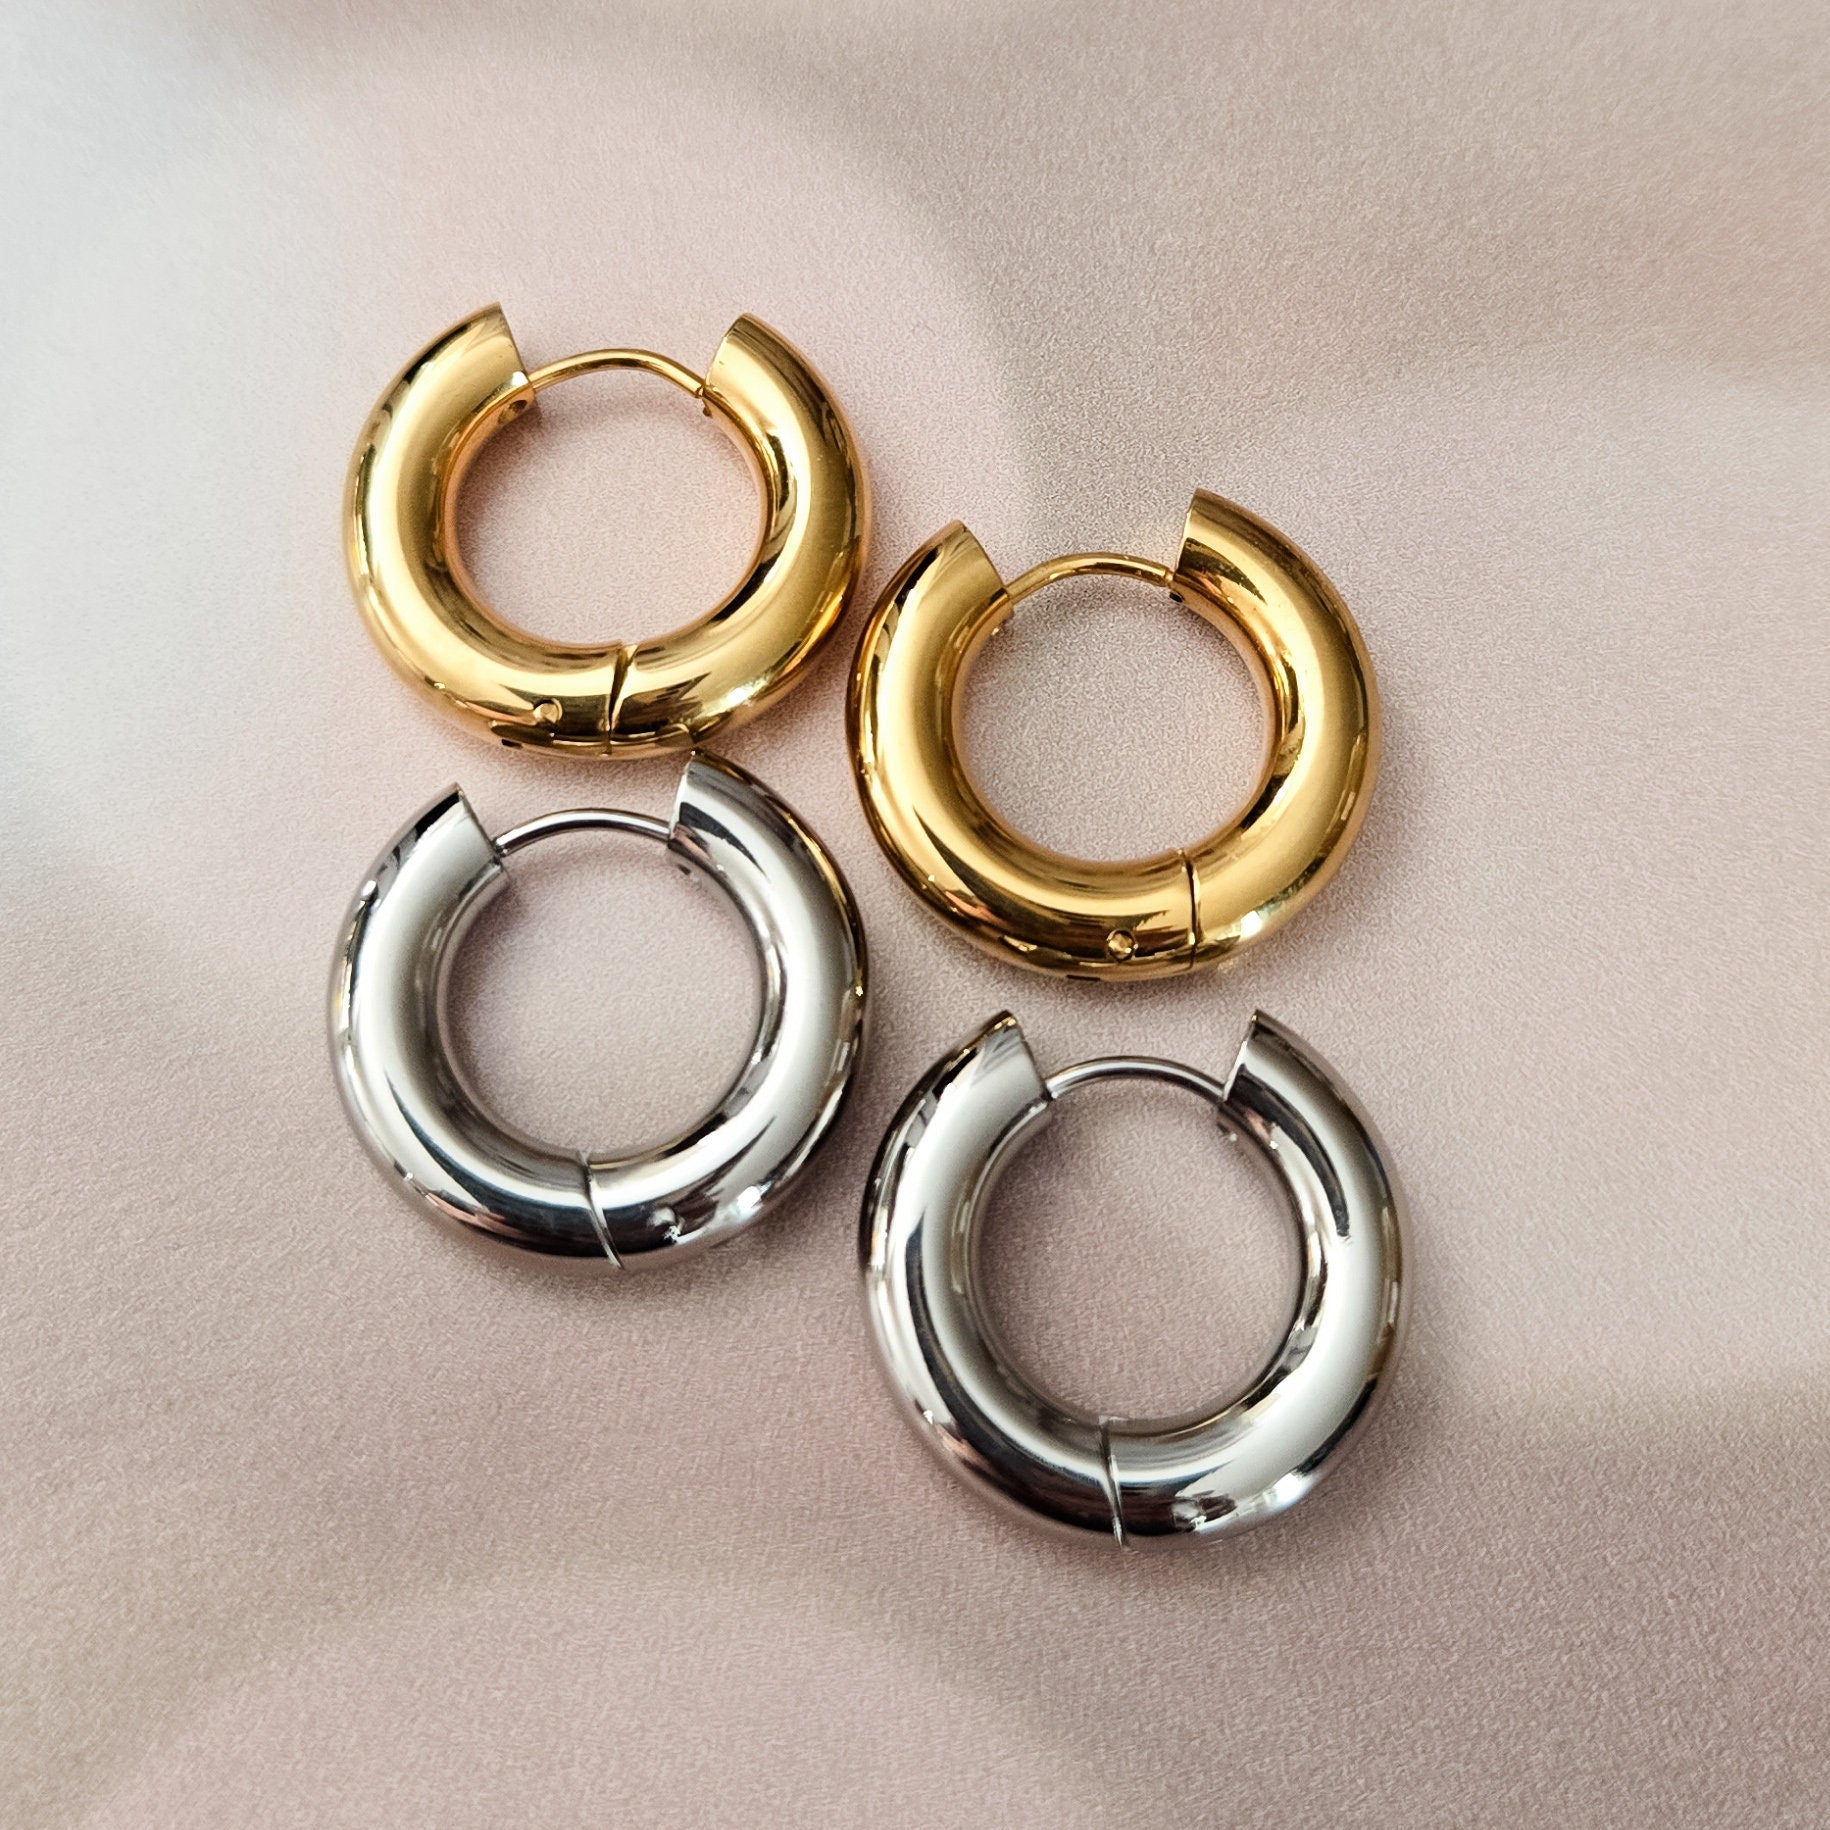 Chunky Gold Hoop Earrings, Trending Statement Jewelry, Women's Thick Silver Huggie Hoops, Trendy Jewelry Graduation Gift for Her Salt and Sparkle